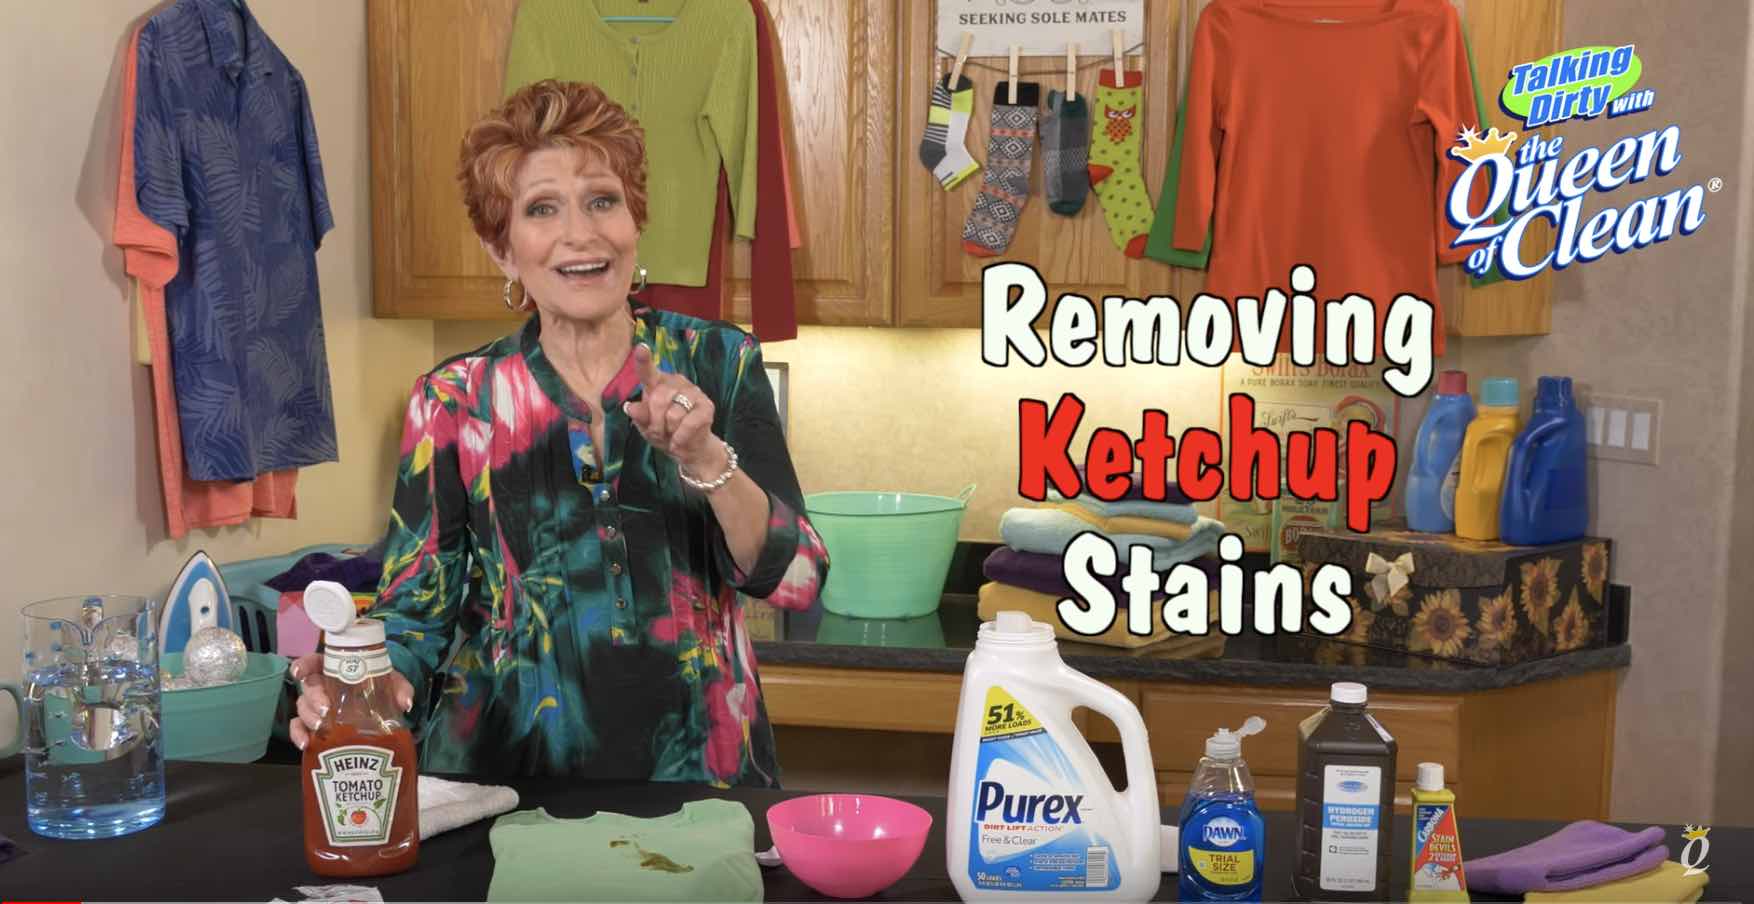 1. "How to Remove Ketchup Stains from Blue Green Hair" 
2. "DIY Hair Mask for Removing Ketchup from Blue Green Hair" 
3. "The Effects of Ketchup on Blue Green Hair" 
4. "Ketchup as a Natural Hair Dye for Blue Green Hair" 
5. "Tips for Preventing Ketchup Stains on Blue Green Hair" 
6. "The Science Behind Ketchup Stains on Blue Green Hair" 
7. "Ketchup and Other Food Stains on Blue Green Hair: How to Remove Them" 
8. "The Best Shampoos for Removing Ketchup from Blue Green Hair" 
9. "Ketchup on Blue Green Hair: Common Mistakes and How to Fix Them" 
10. "Celebrity Hair Disasters: Ketchup on Blue Green Hair" - wide 2